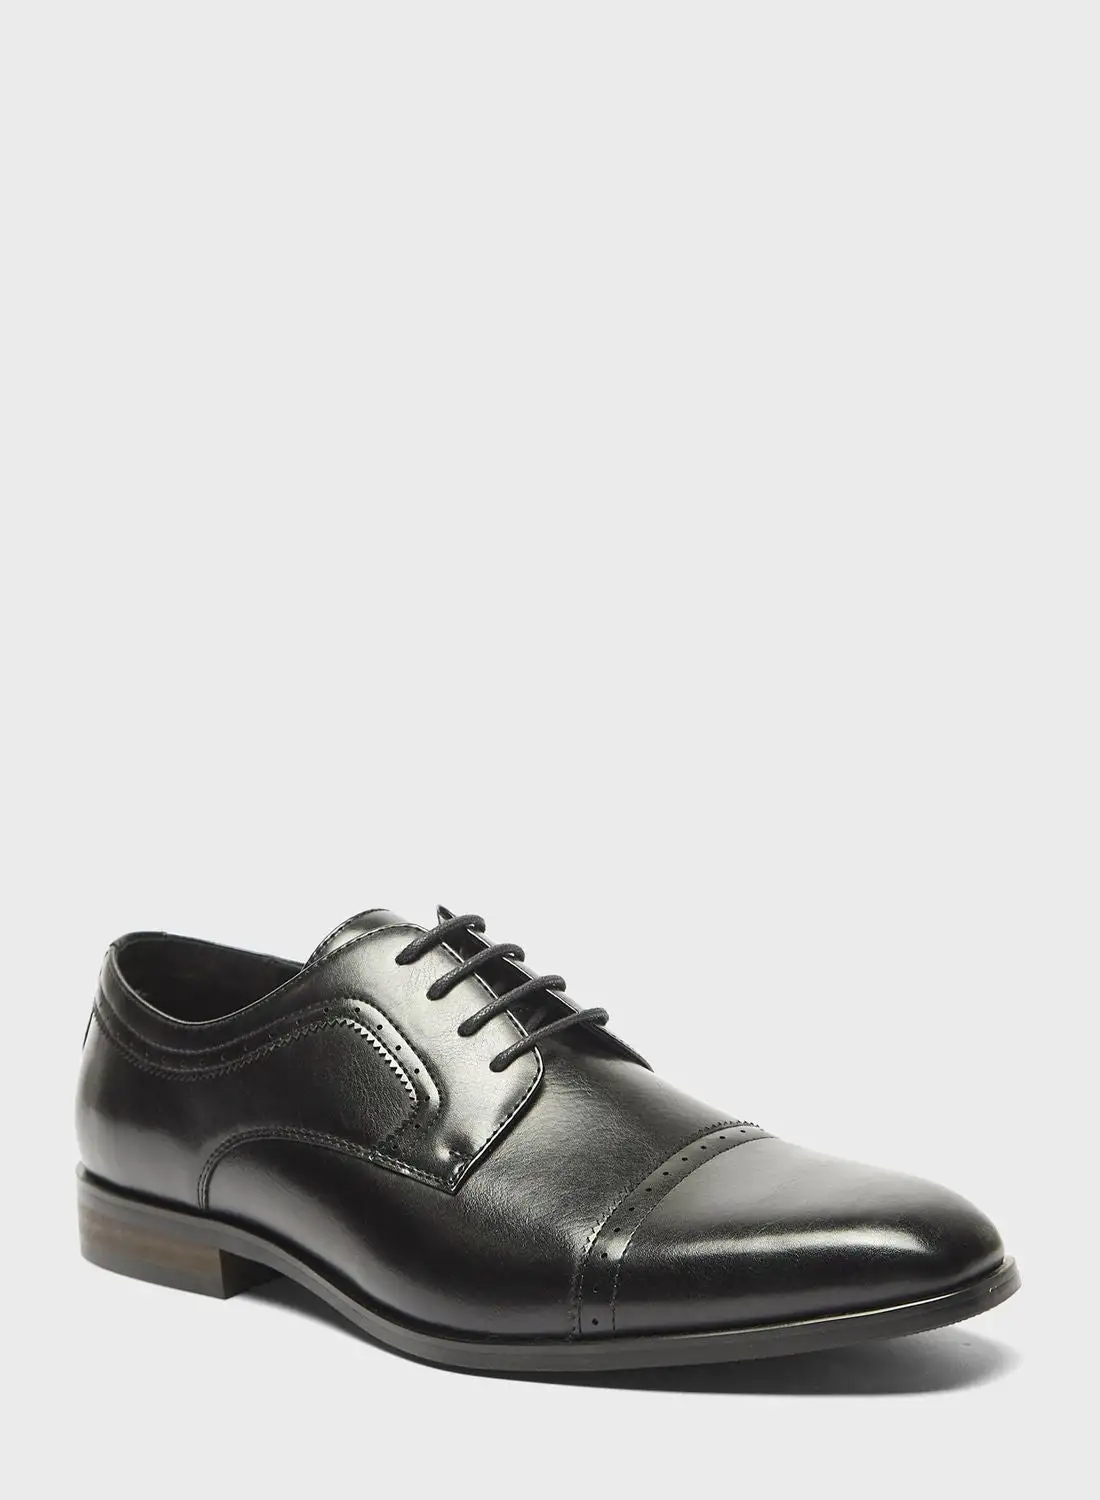 LBL by Shoexpress Formal Lace Up Shoes